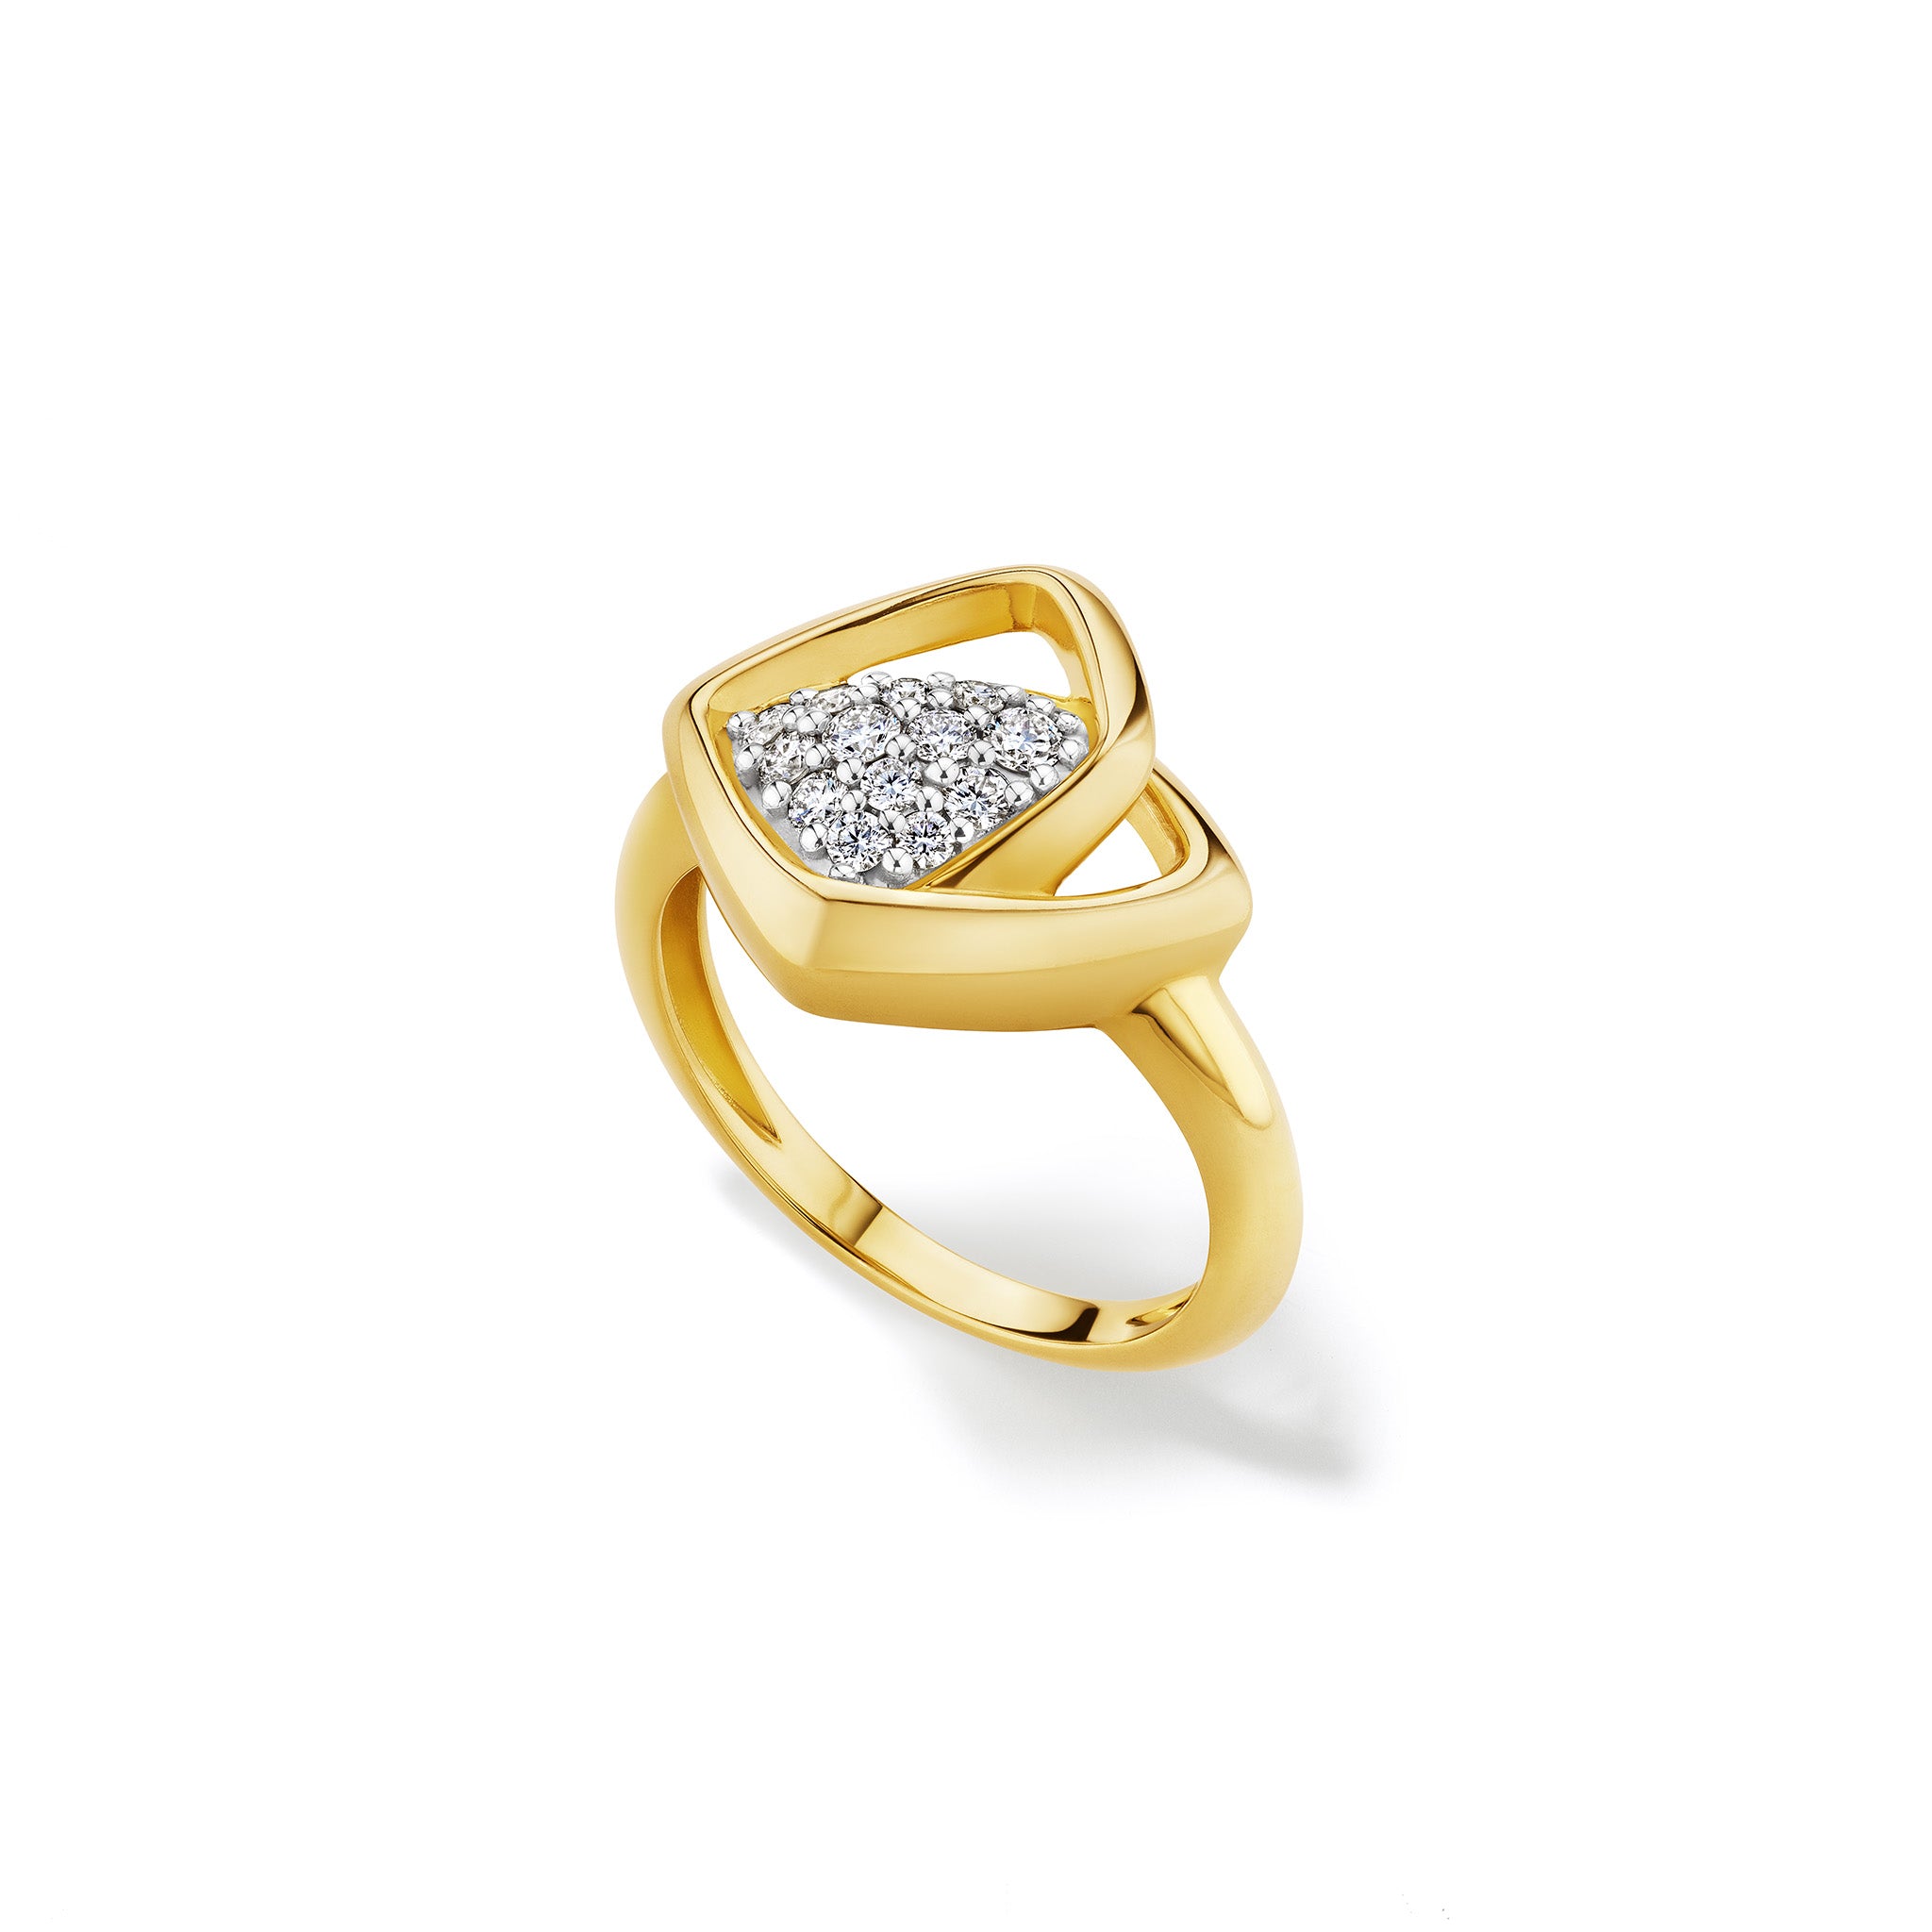 Selvaggia Ring with Diamonds in 14K